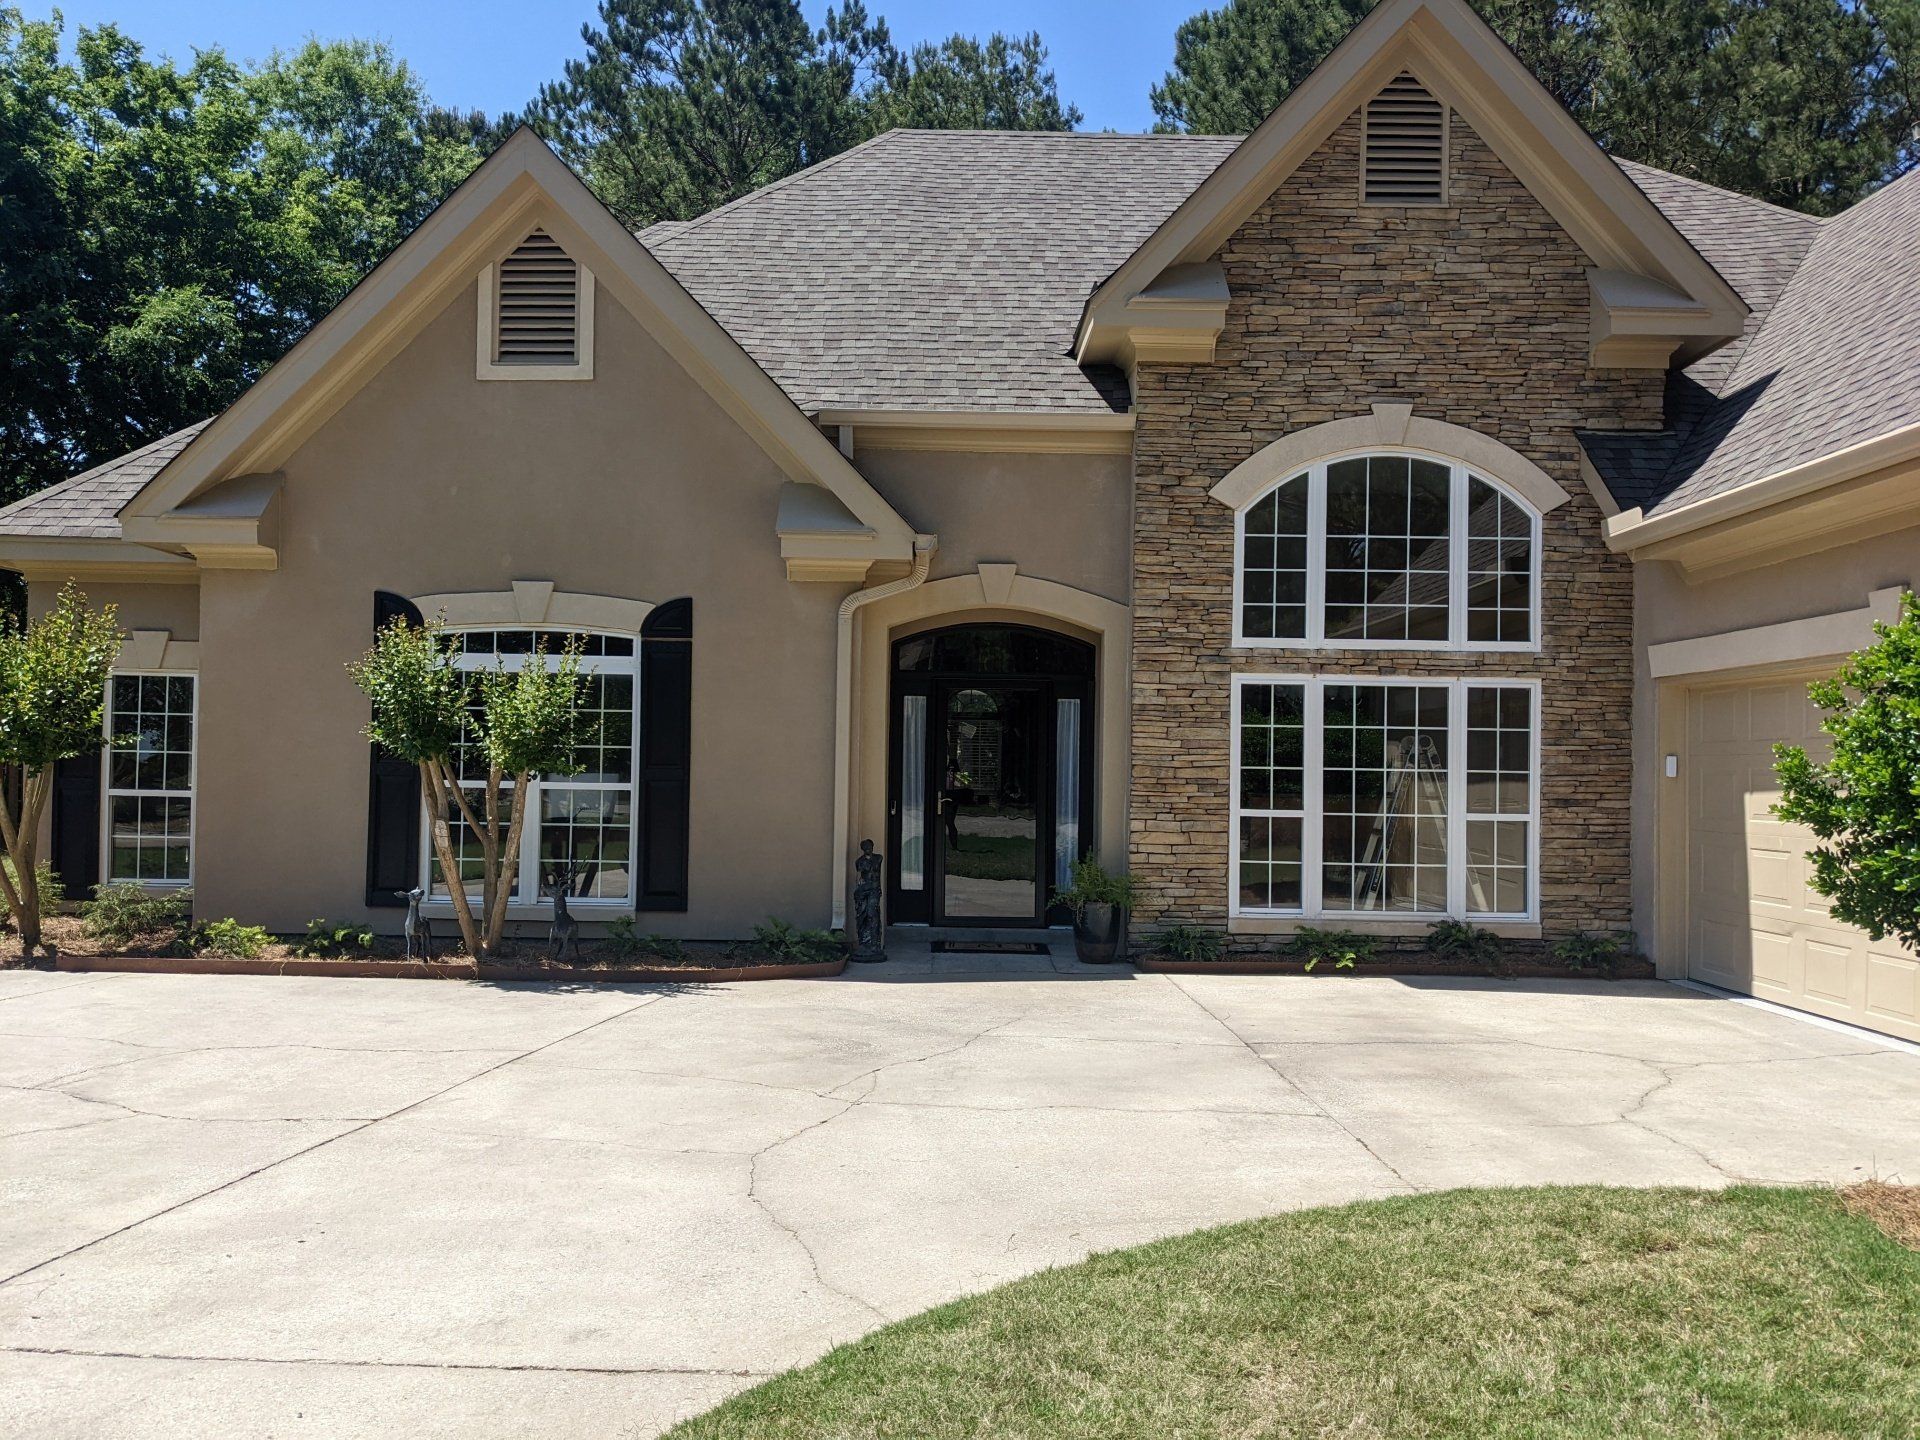 window tinting - Both Heat gain & UV-Sun damage were causing issues for the homeowner here in Deer Creek, AL